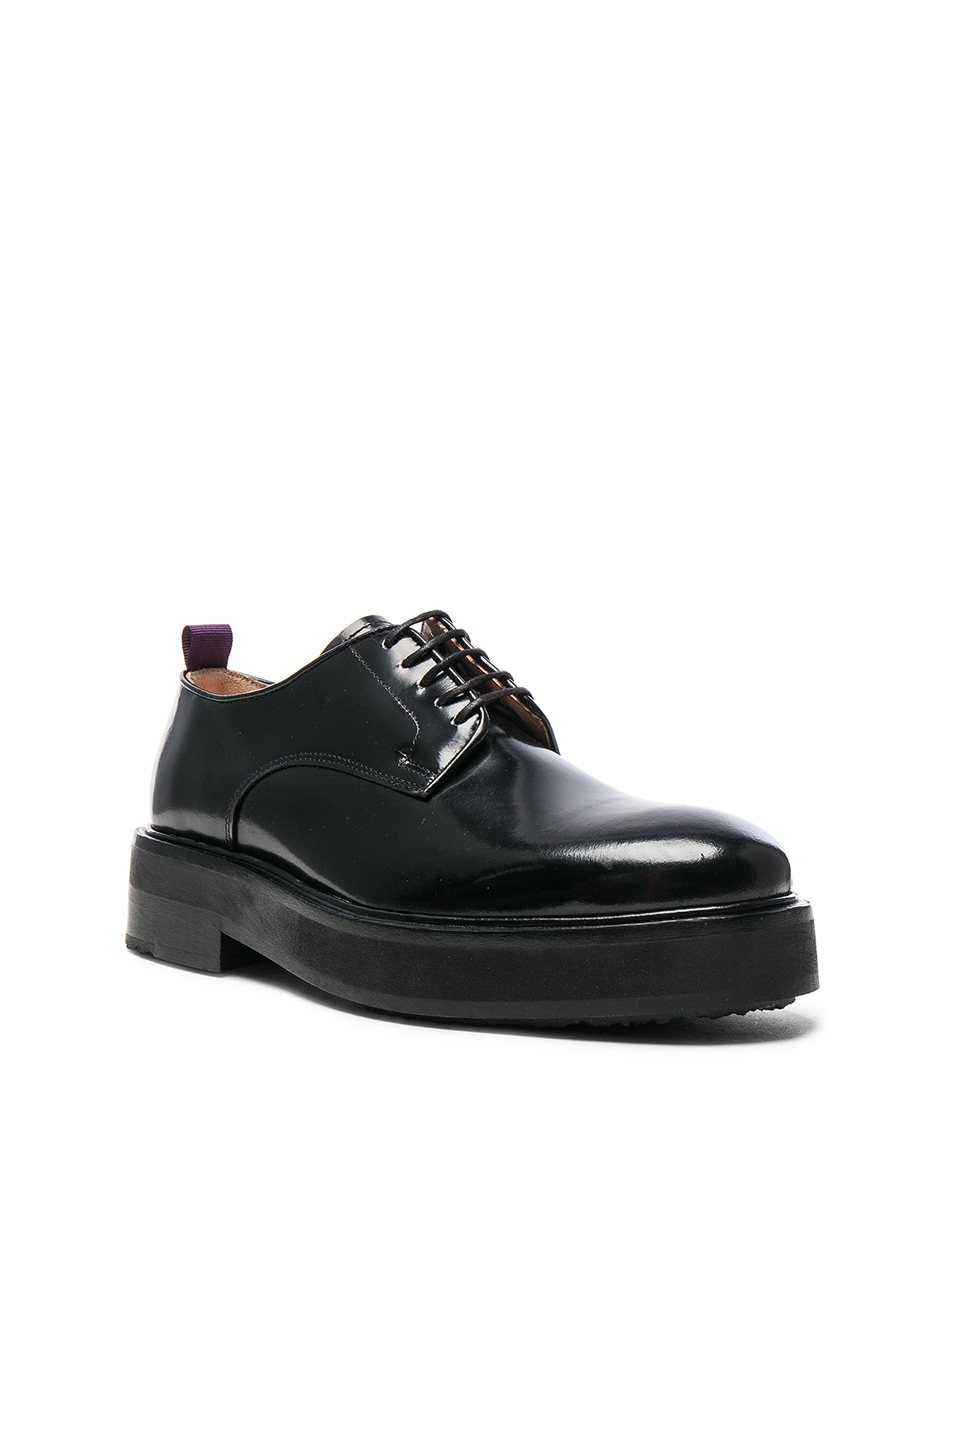 Image 1 of Eytys Leather Kingston Dress Shoes in Black